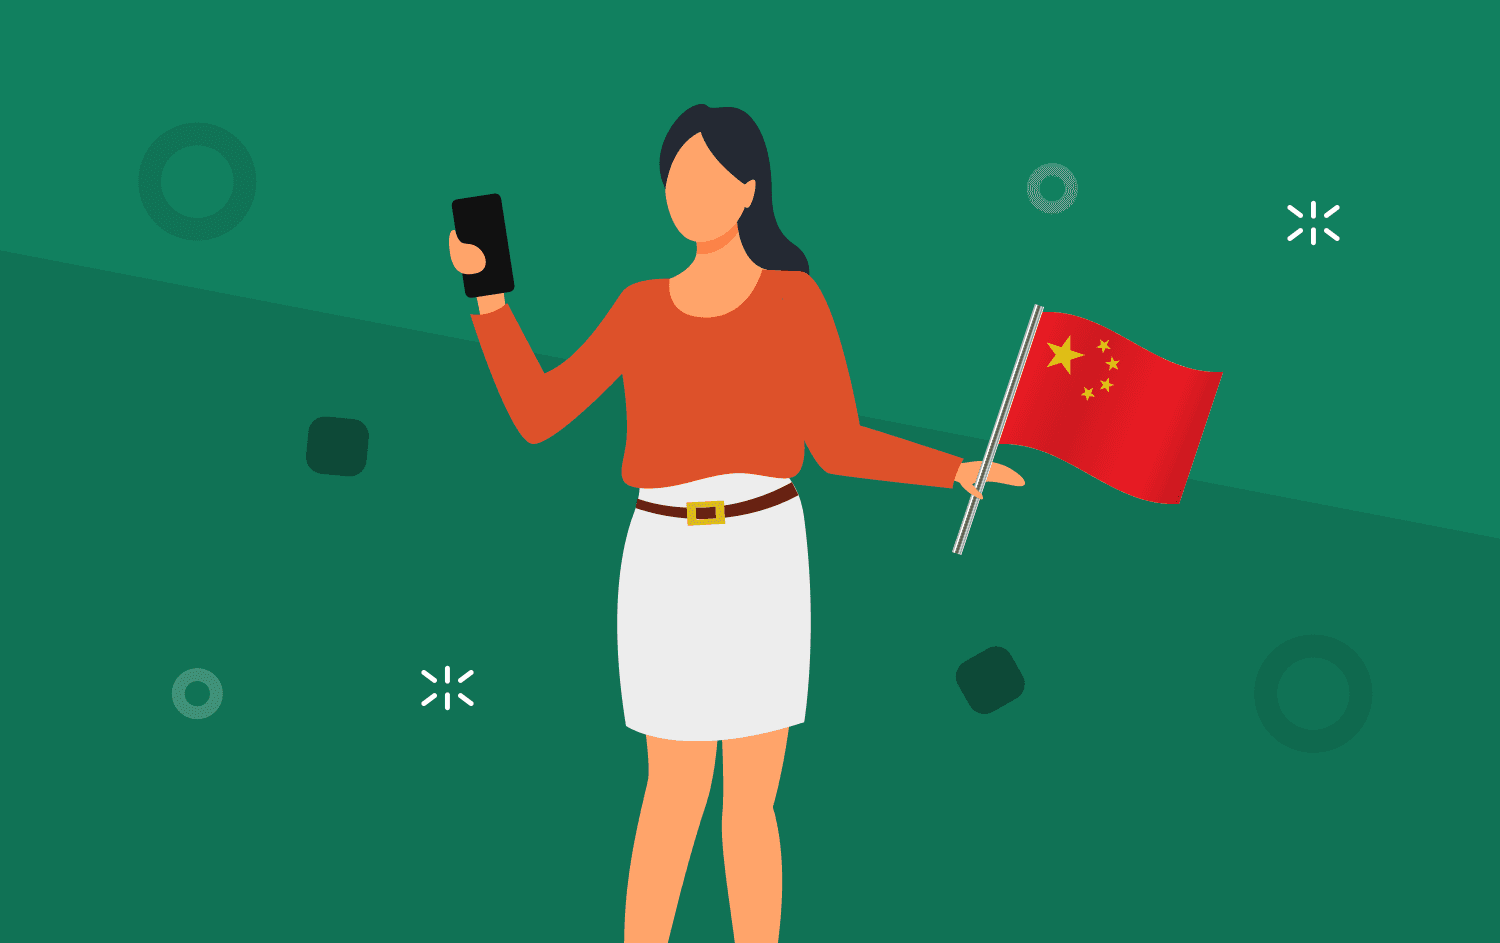  Cartoon representation of someone texting and a Chinese flag in the background